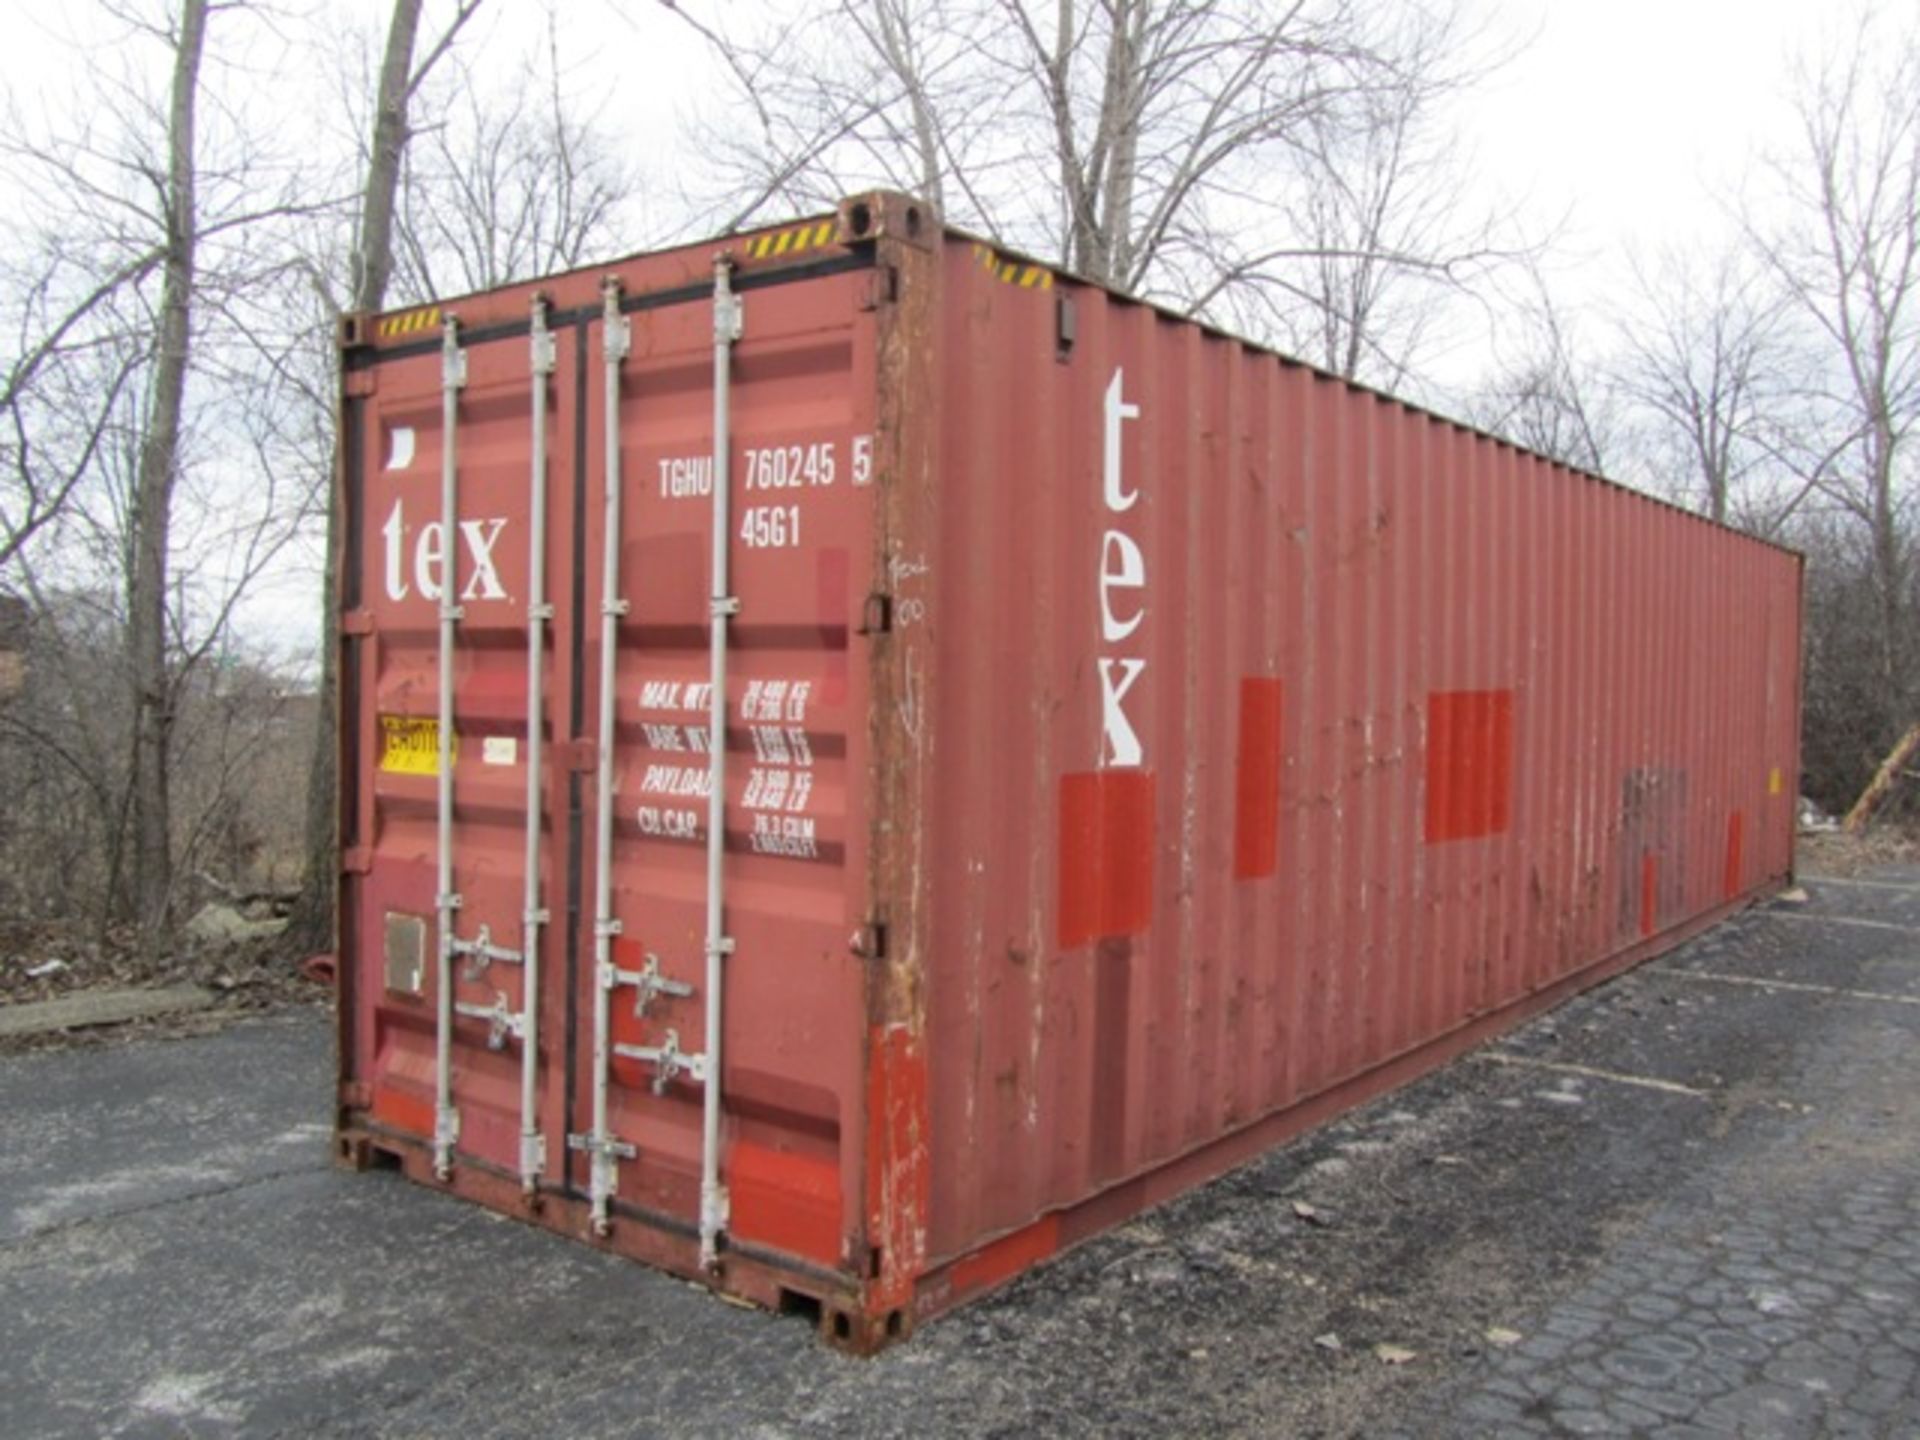 Approx 40' 2-Door Overseas Shipping Container (two week delay delivery)*located Oak Lawn, IL